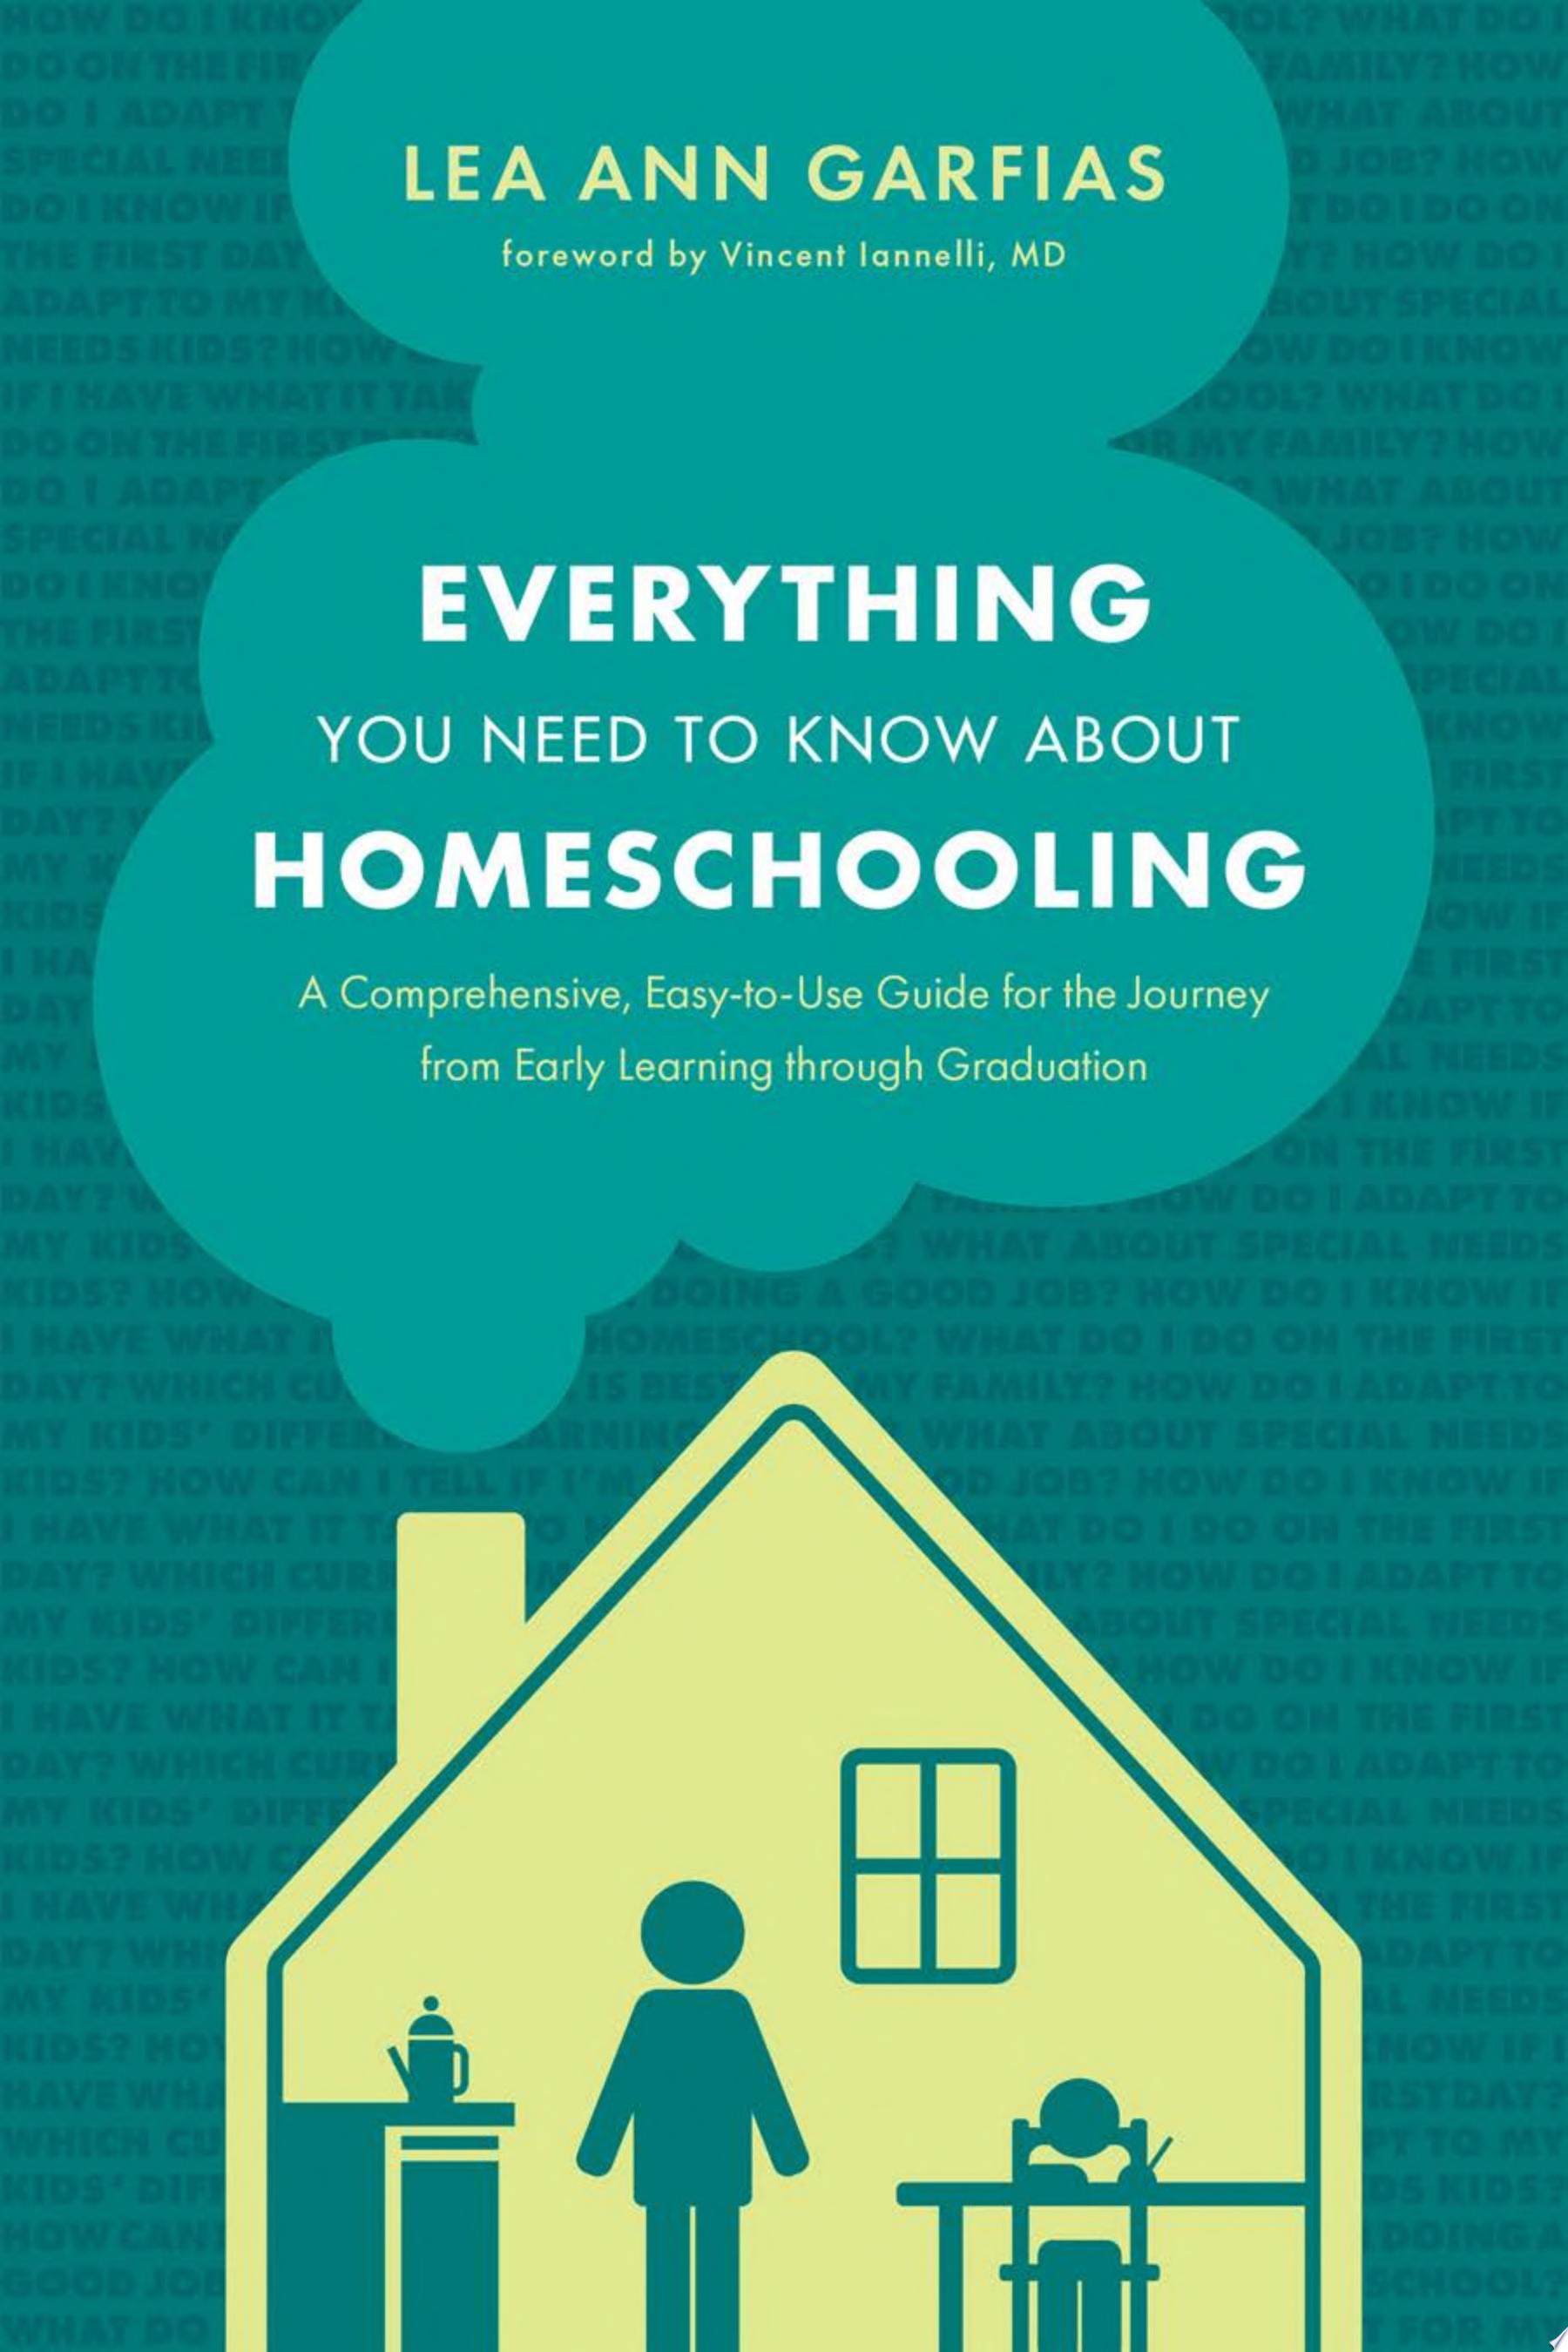 Image for "Everything You Need to Know about Homeschooling"